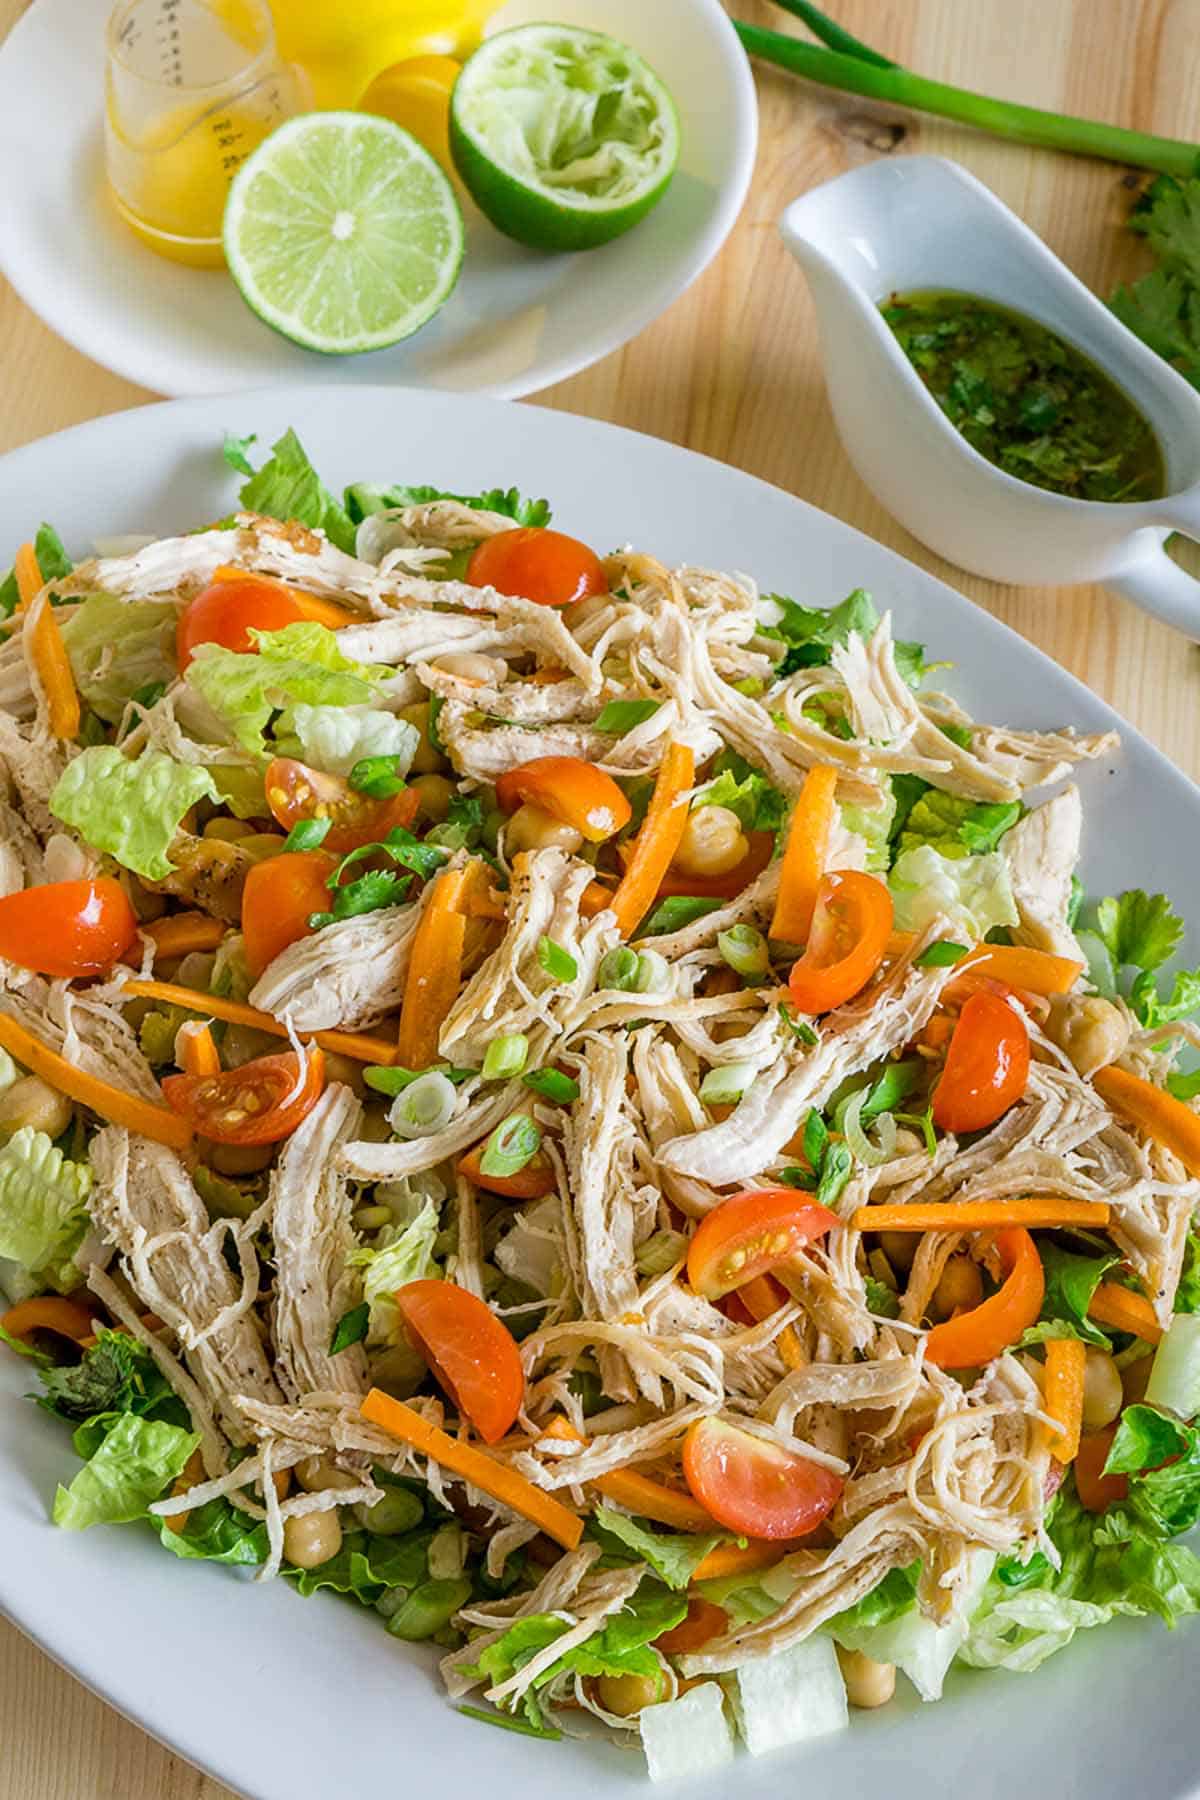 Plate of shredded chicken salad on a table with dressing on the side